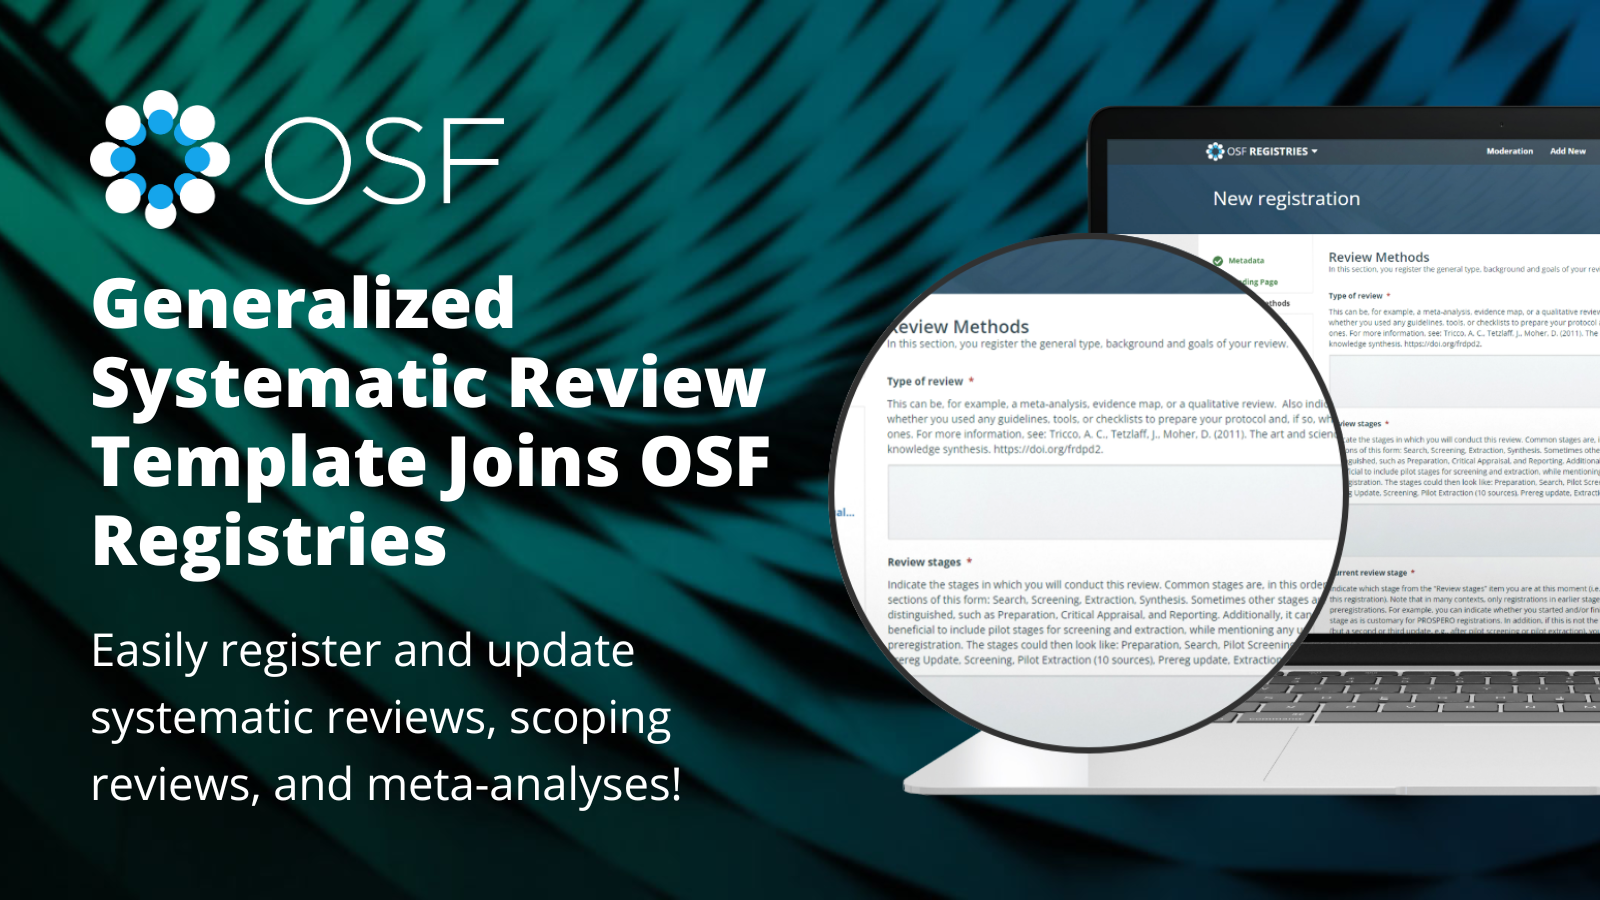 Text: Generalized Systematic Review Template Joins OSF Registries with screenshot of registration template